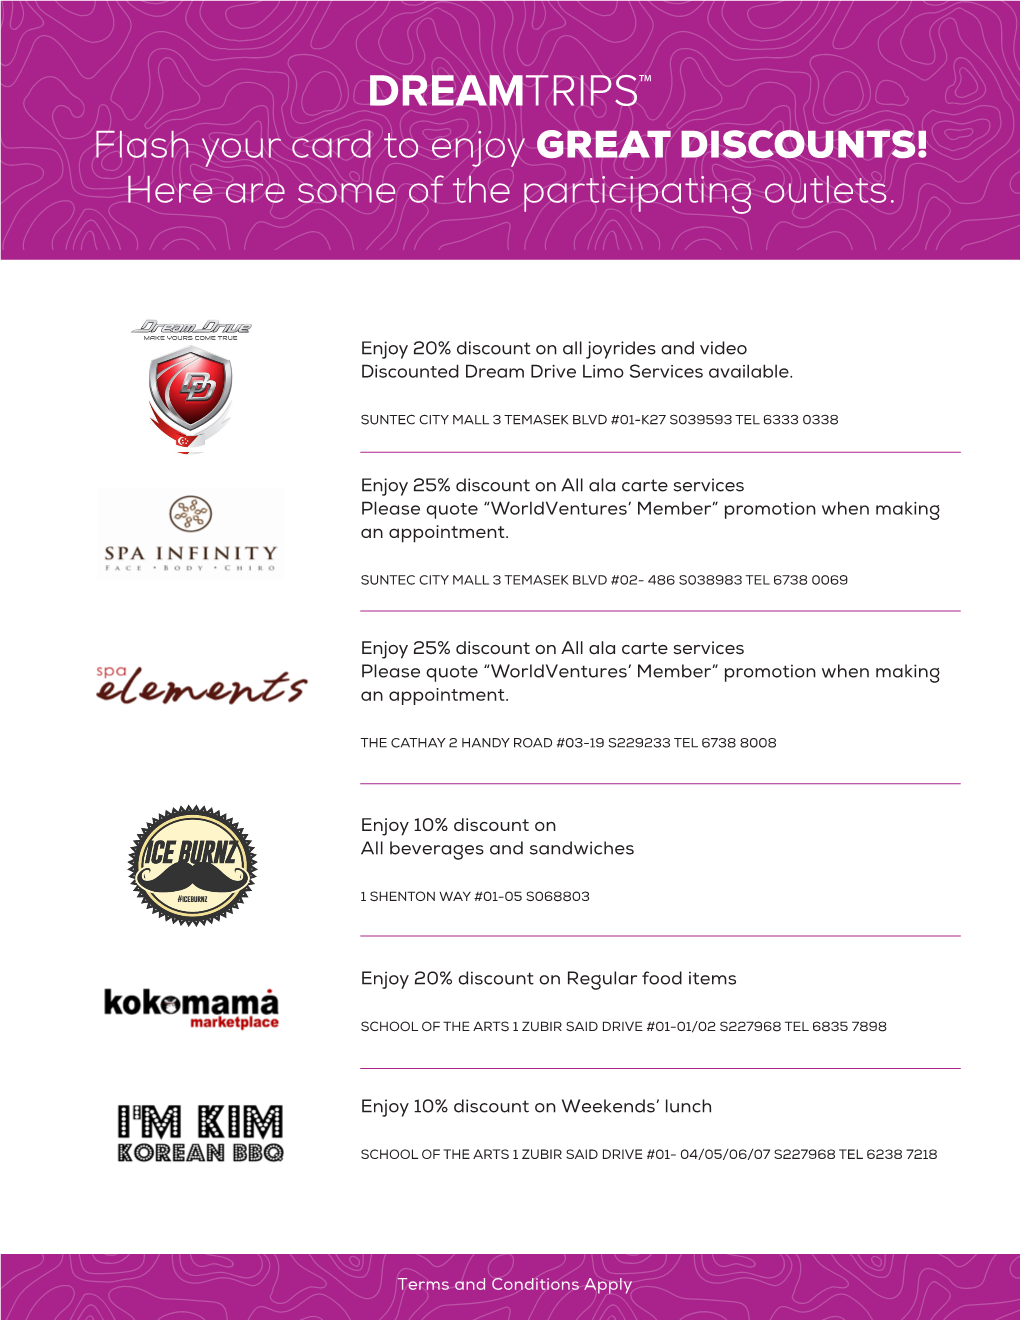 Flash Your Card to Enjoy GREAT DISCOUNTS! Here Are Some of the Participating Outlets